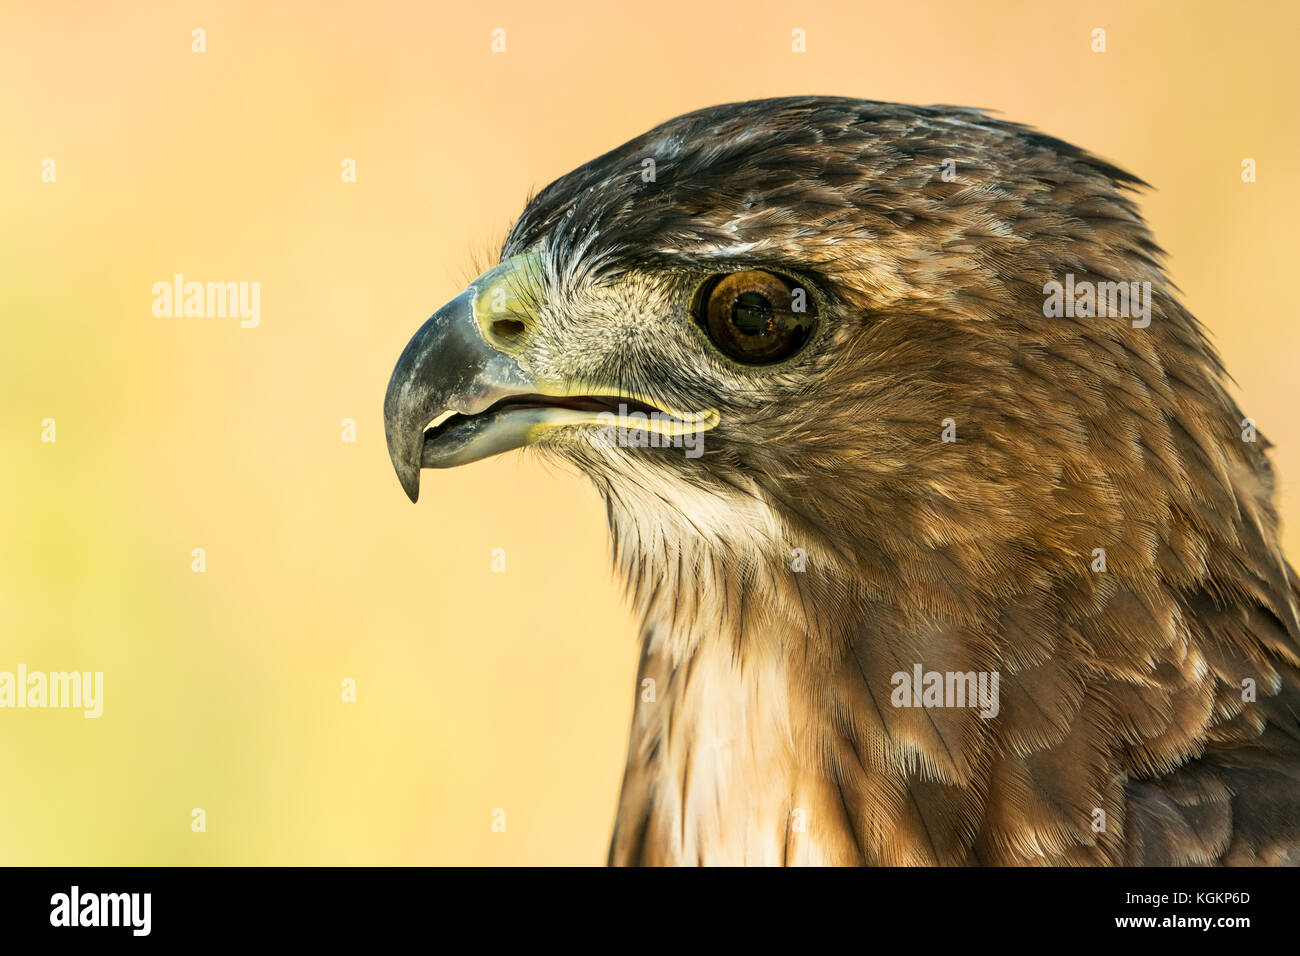 Profile Portrait of a Red-Tailed Hawk Against a Yellow Background Stock Photo